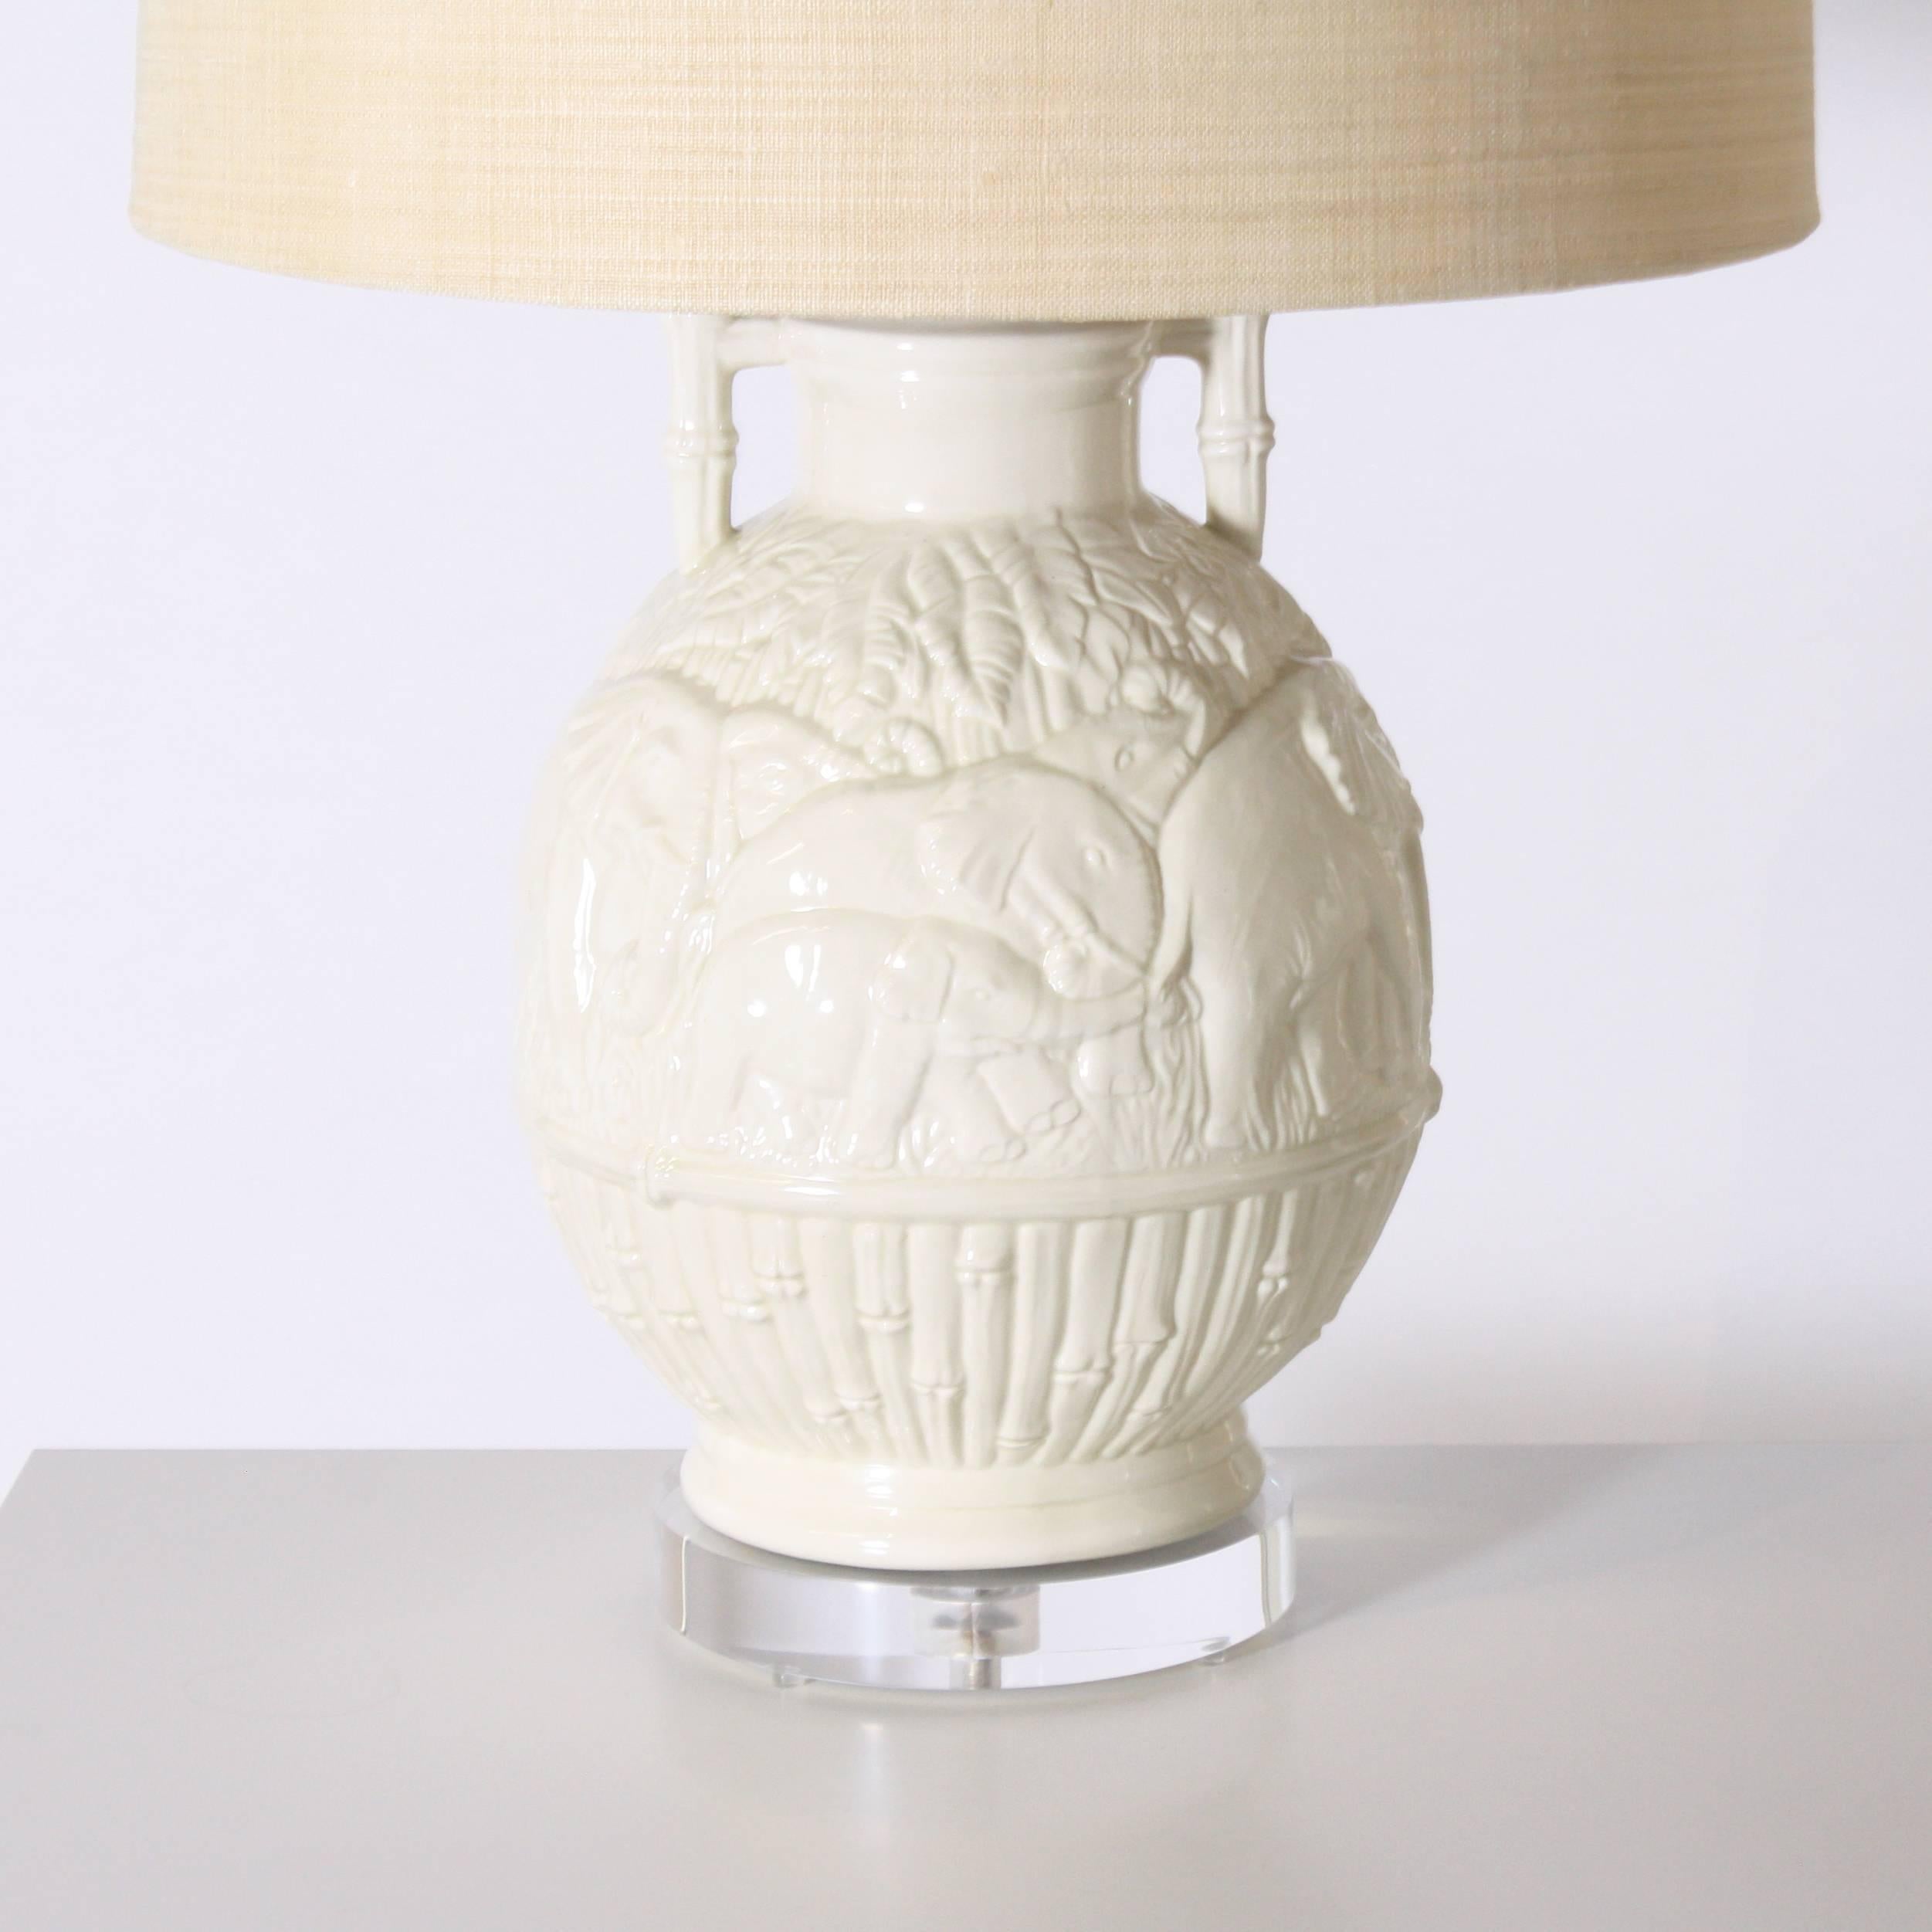 1960s white ceramic ginger jar lamp with elephant and faux bamboo detail. 21